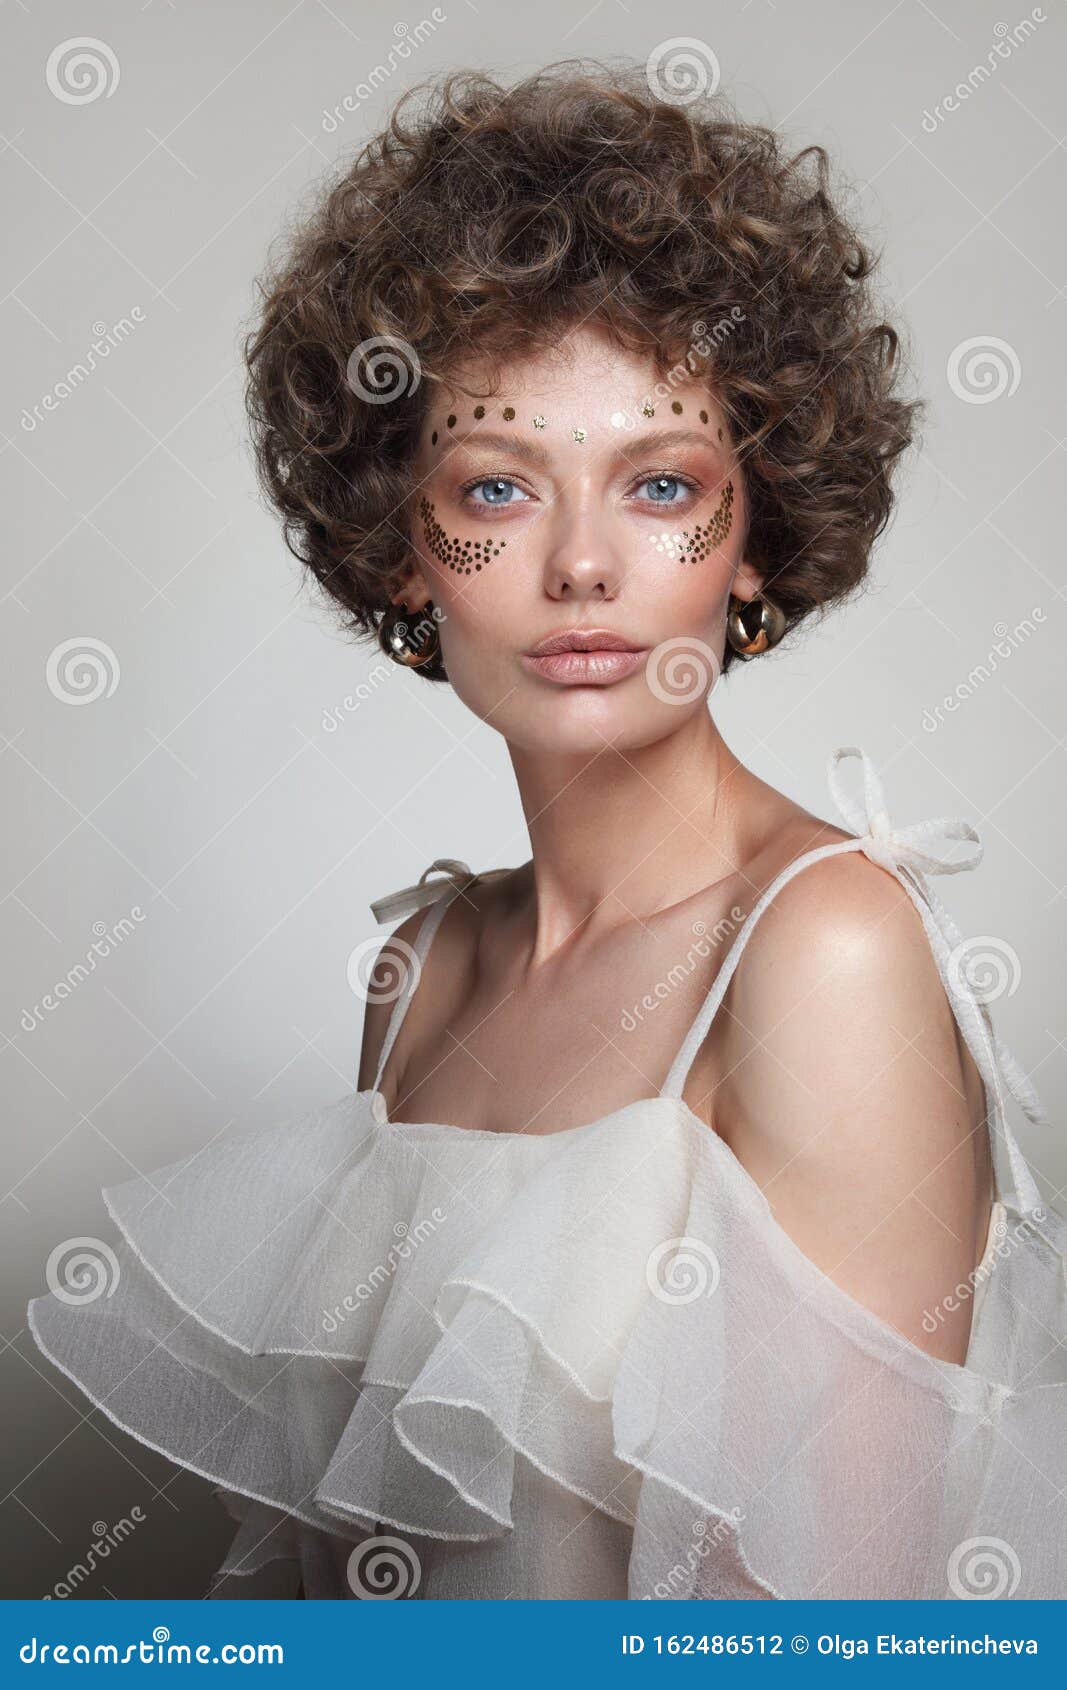 Frosty Makeup - Cool Elegance.Portrait, Close-up On The Face Of A Woman In  A Fancy Makeup. Stock Photo, Picture and Royalty Free Image. Image 38736774.